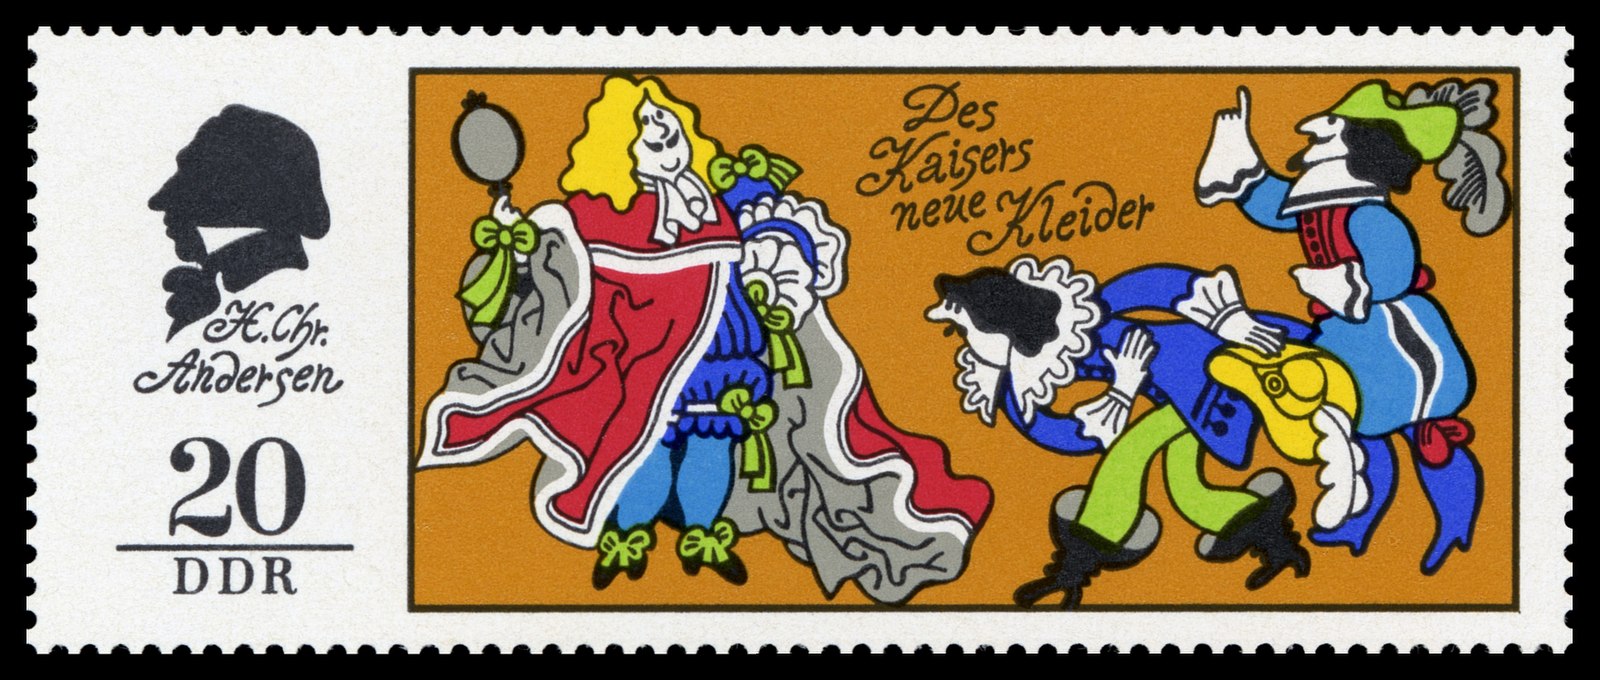 German stamp depicting the emperor's new clothes from the Hans Christian Anderson story